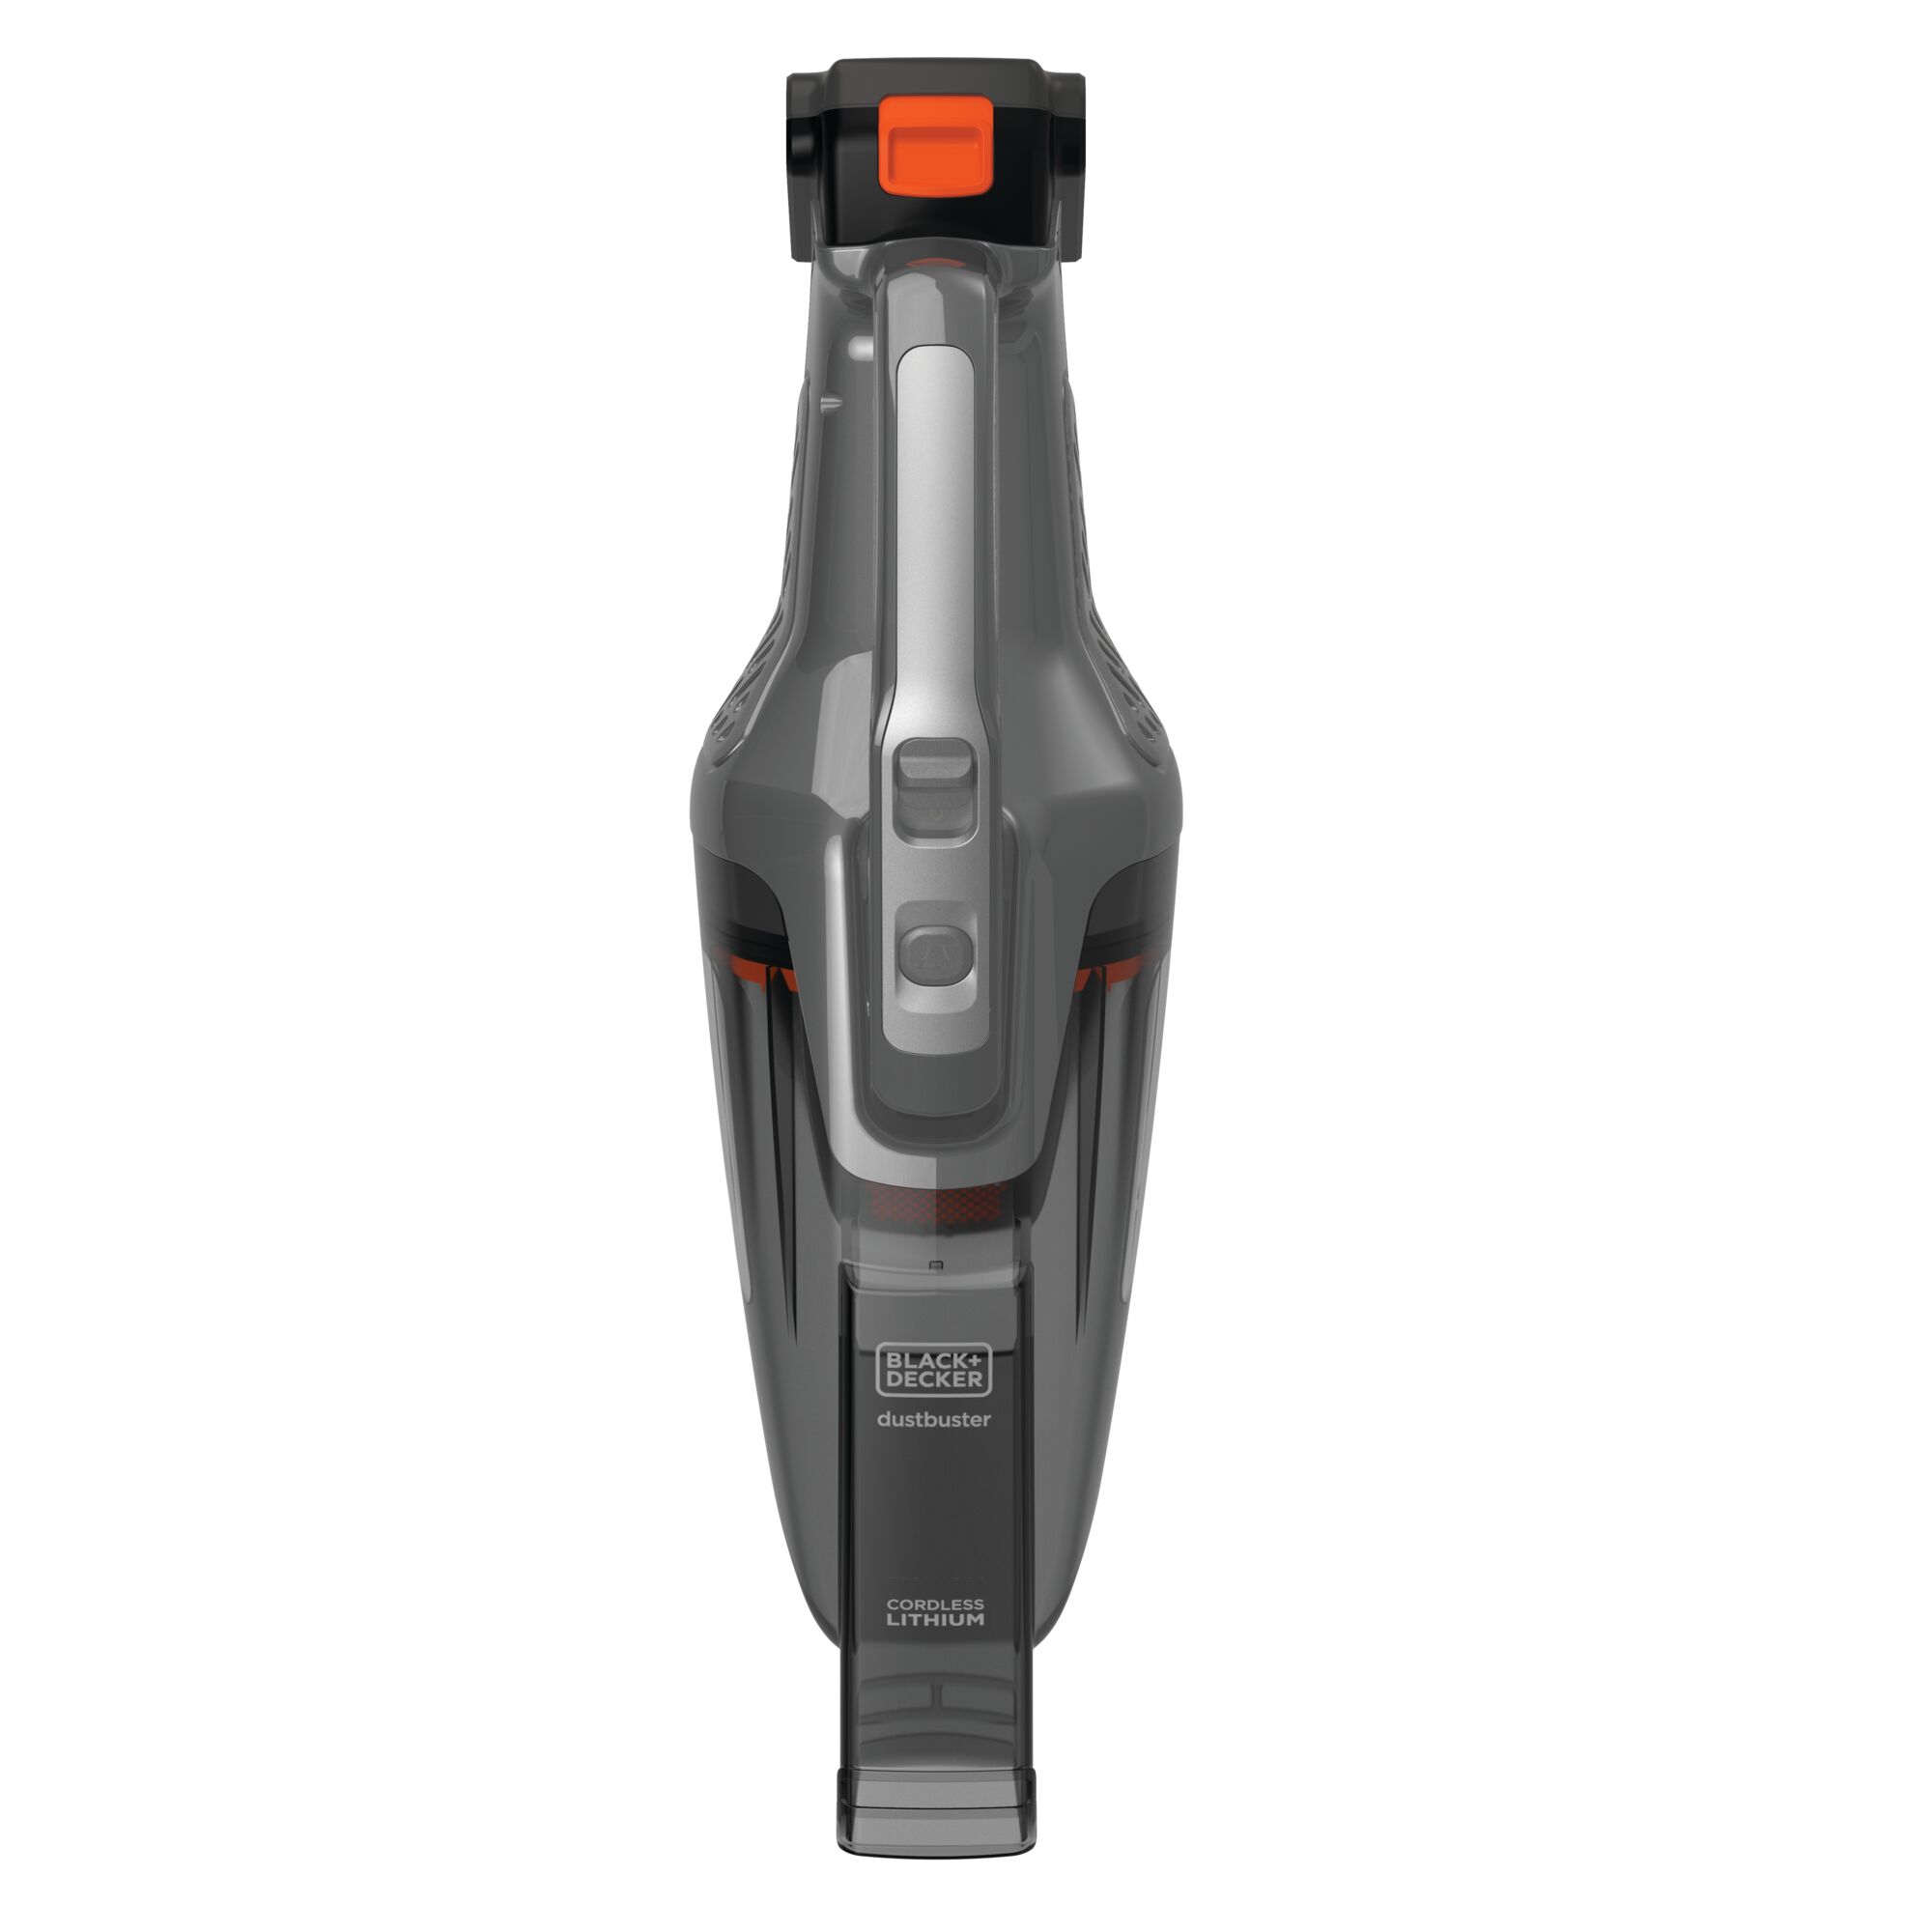 Overhead view of Black and Decker Dustbuster 20V MAX* POWERCONNECT Cordless Handheld Vacuum